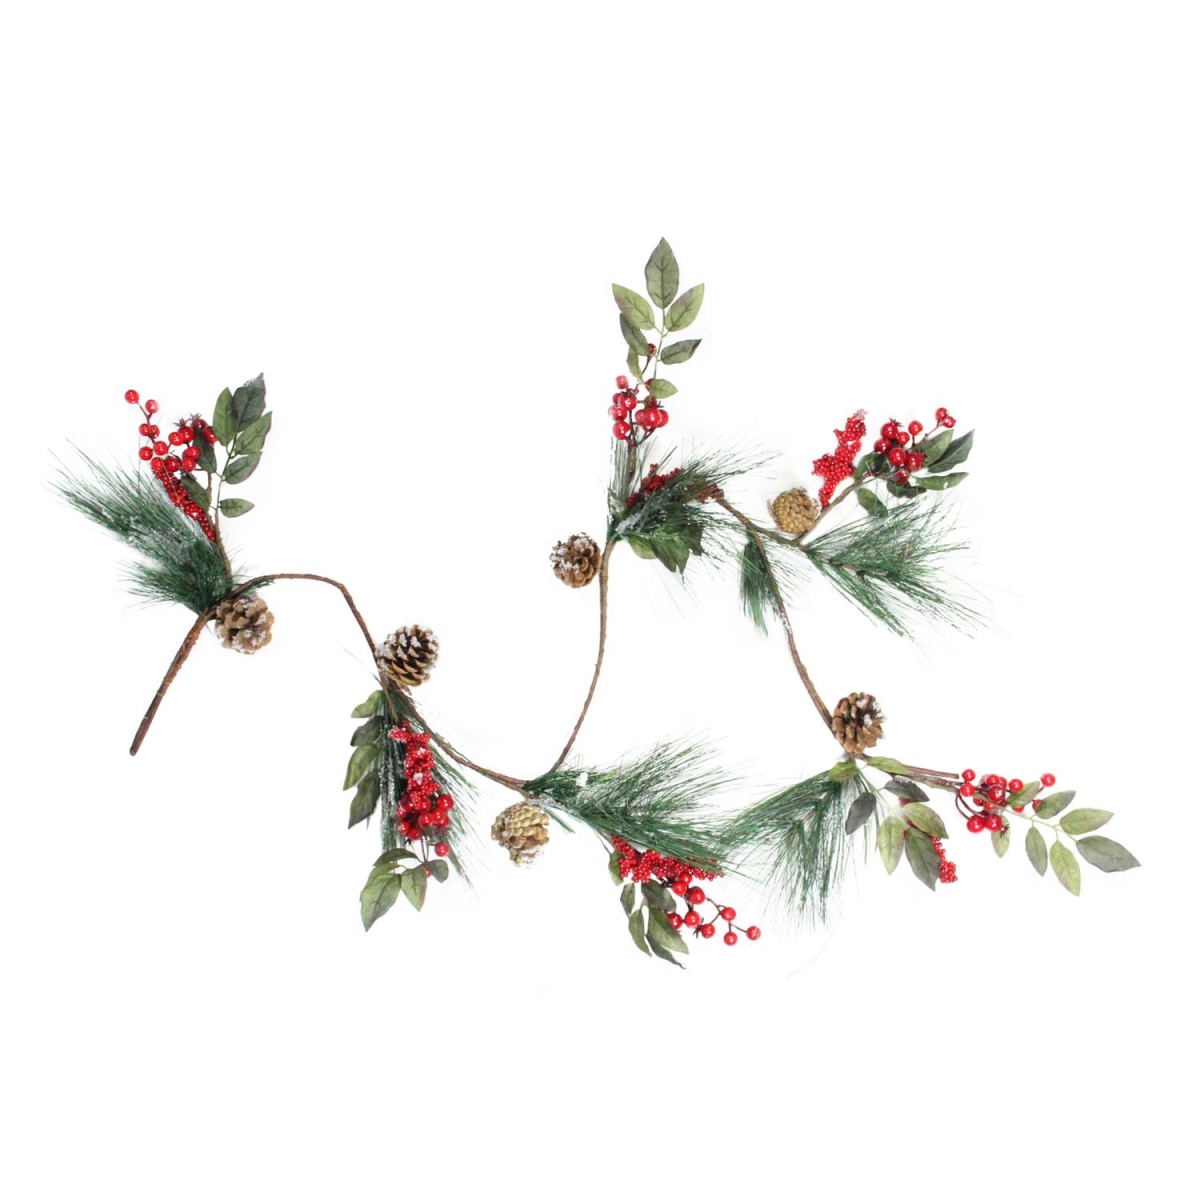 32635581 54 In. Snow Dusted Pine Cones Berries & Long Pine Needles Artificial Christmas Garland - Unlit